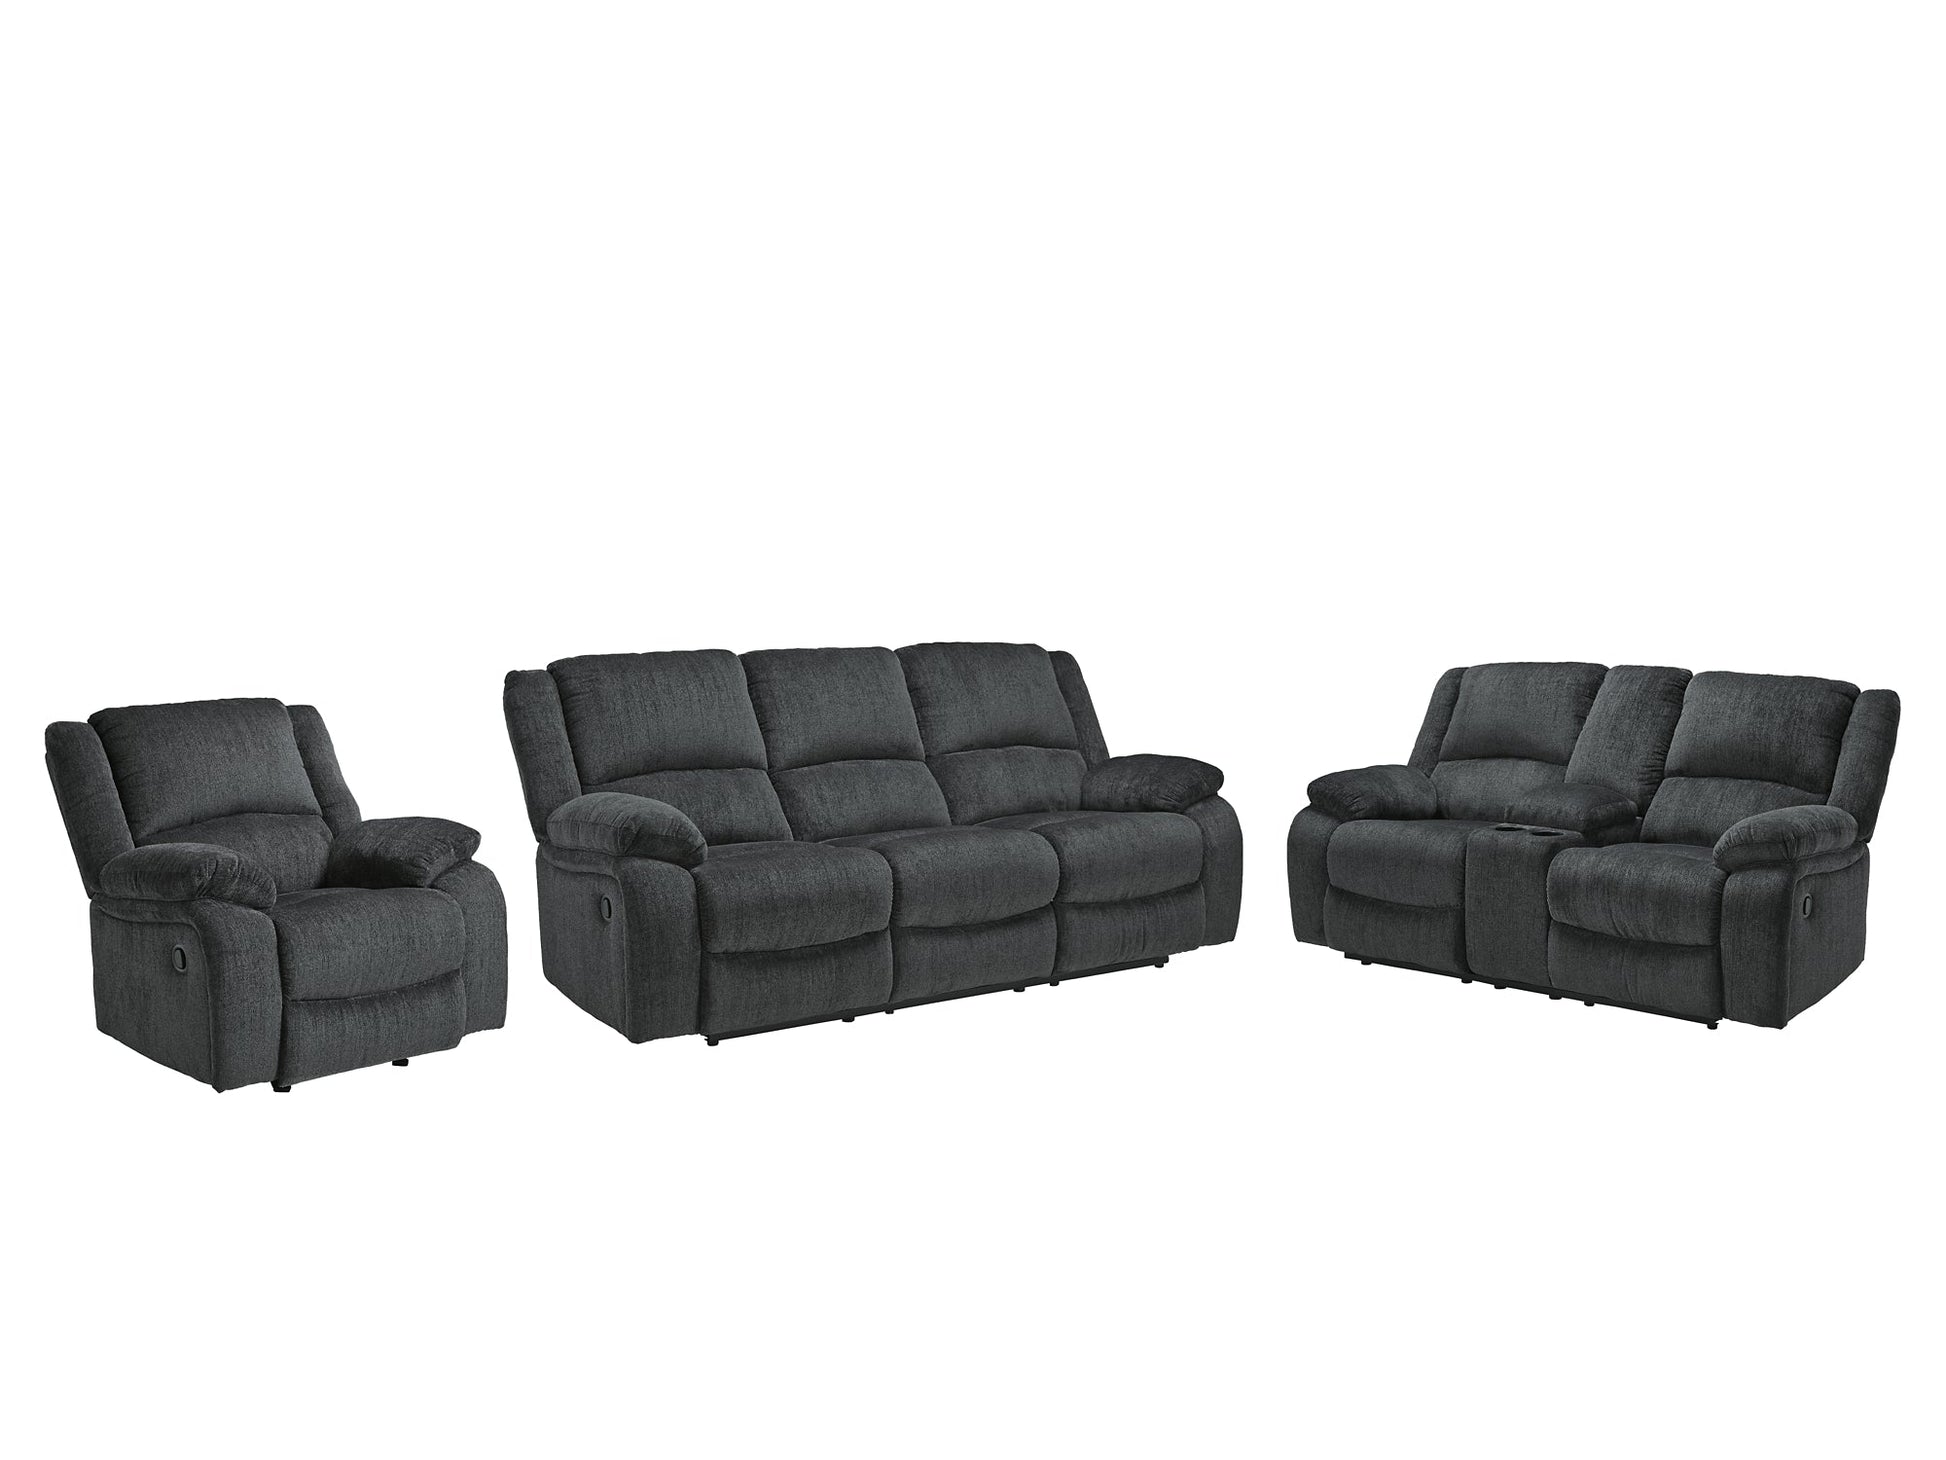 Draycoll Sofa, Loveseat and Recliner at Walker Mattress and Furniture Locations in Cedar Park and Belton TX.